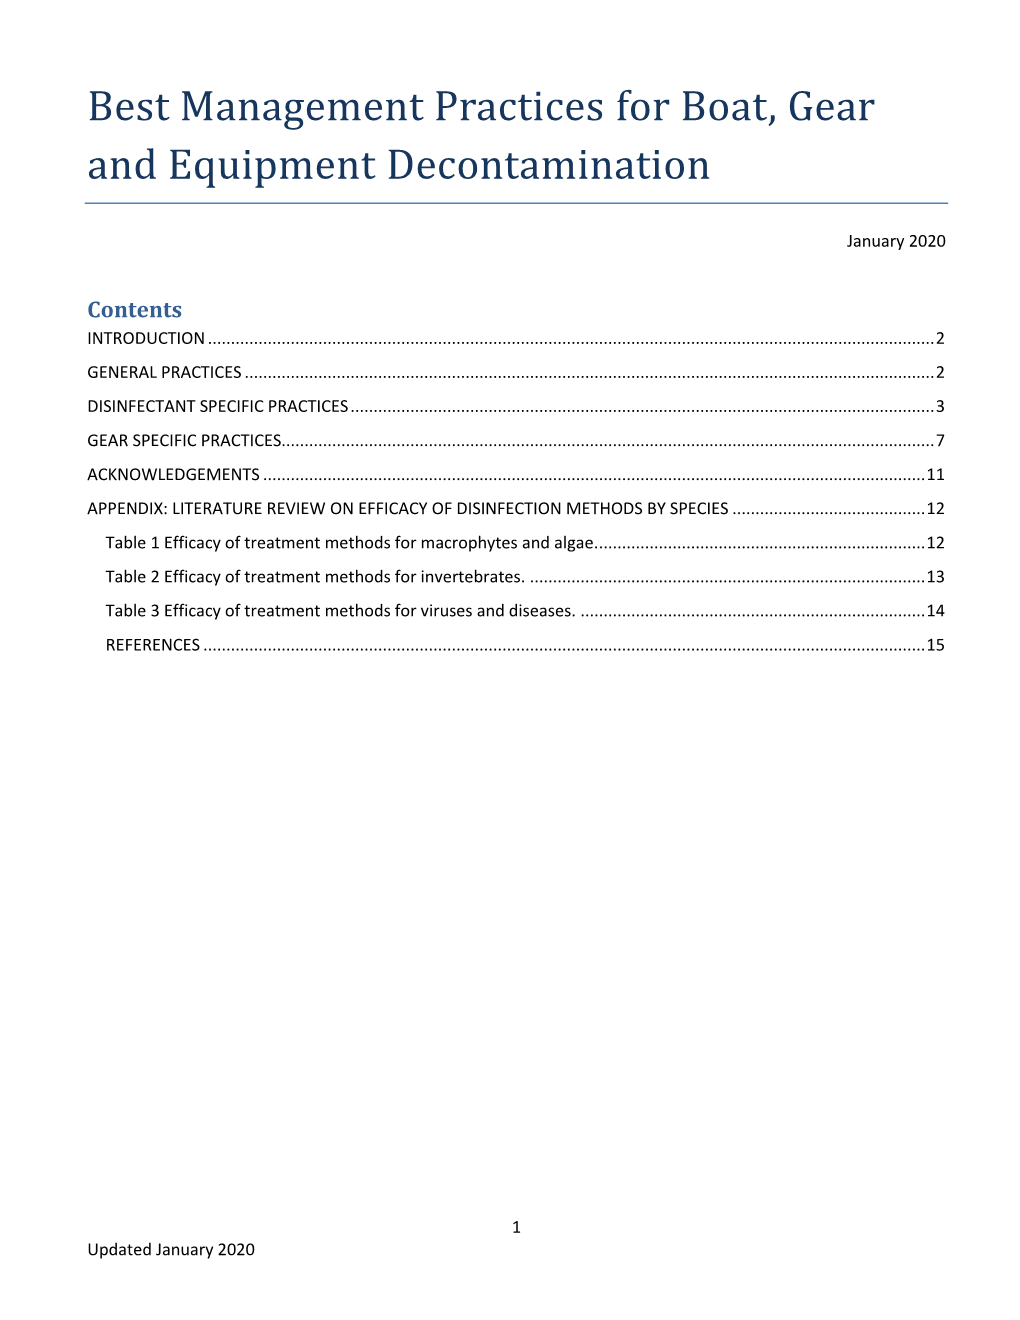 Best Management Practices for Boat, Gear and Equipment Decontamination